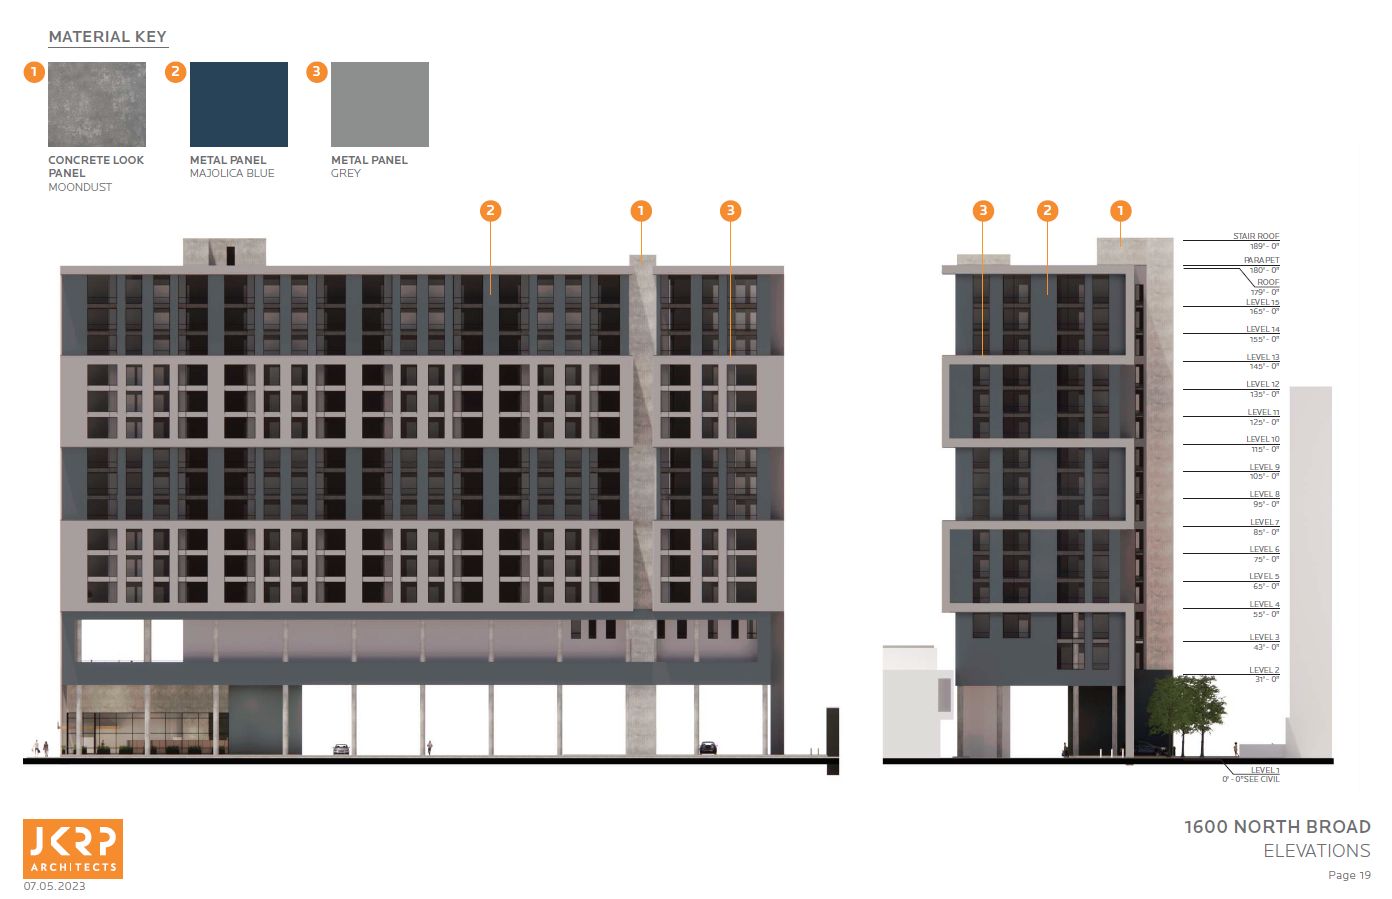 1600 North Broad Street (1406 Cecil B. Moore Avenue). Building elevations. Credit: JKRP Architects via the Civic Design Review